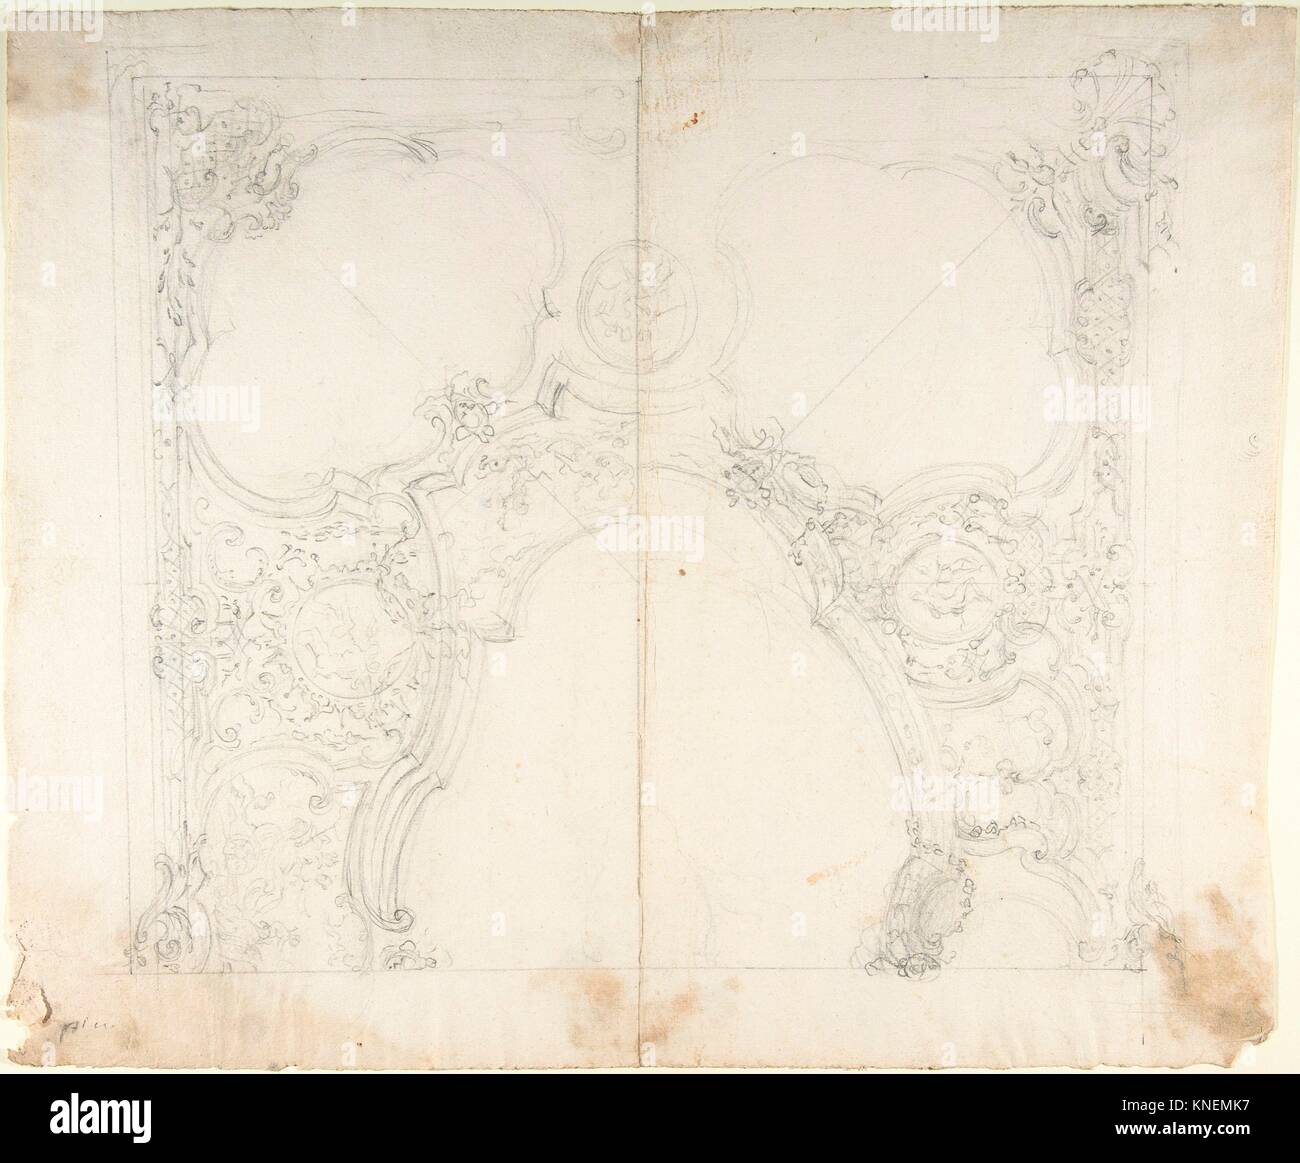 Design for One Half of a Ceiling with Medaillons with Figure Sketches Inside (recto); Design for an Interior Wall Elevation (verso). Artist: Workshop Stock Photo